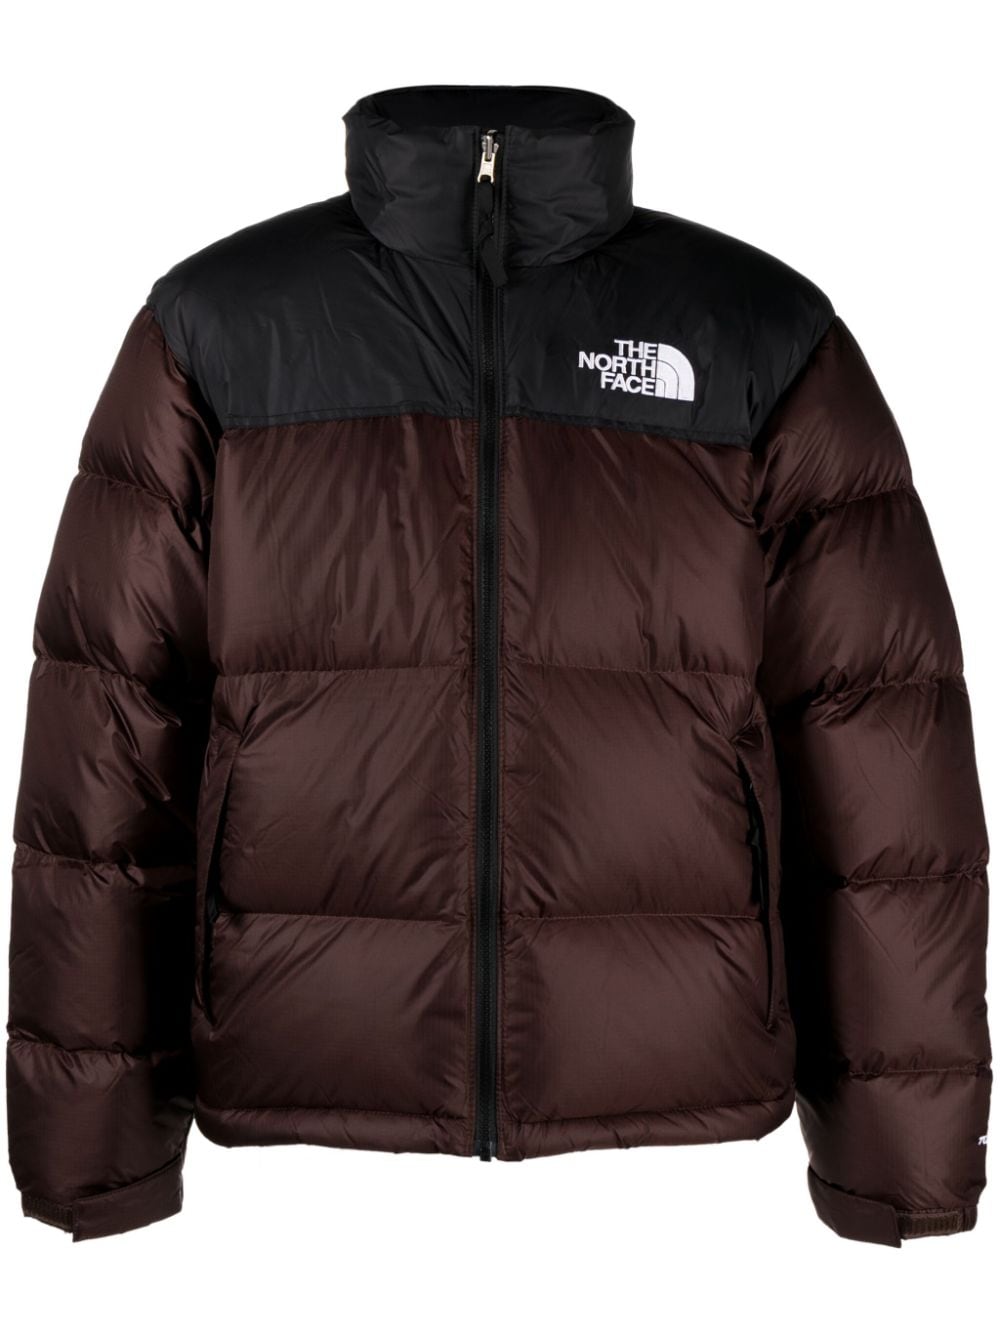 The North Face 1996 Retro Nuptse ripstop down jacket - Red von The North Face